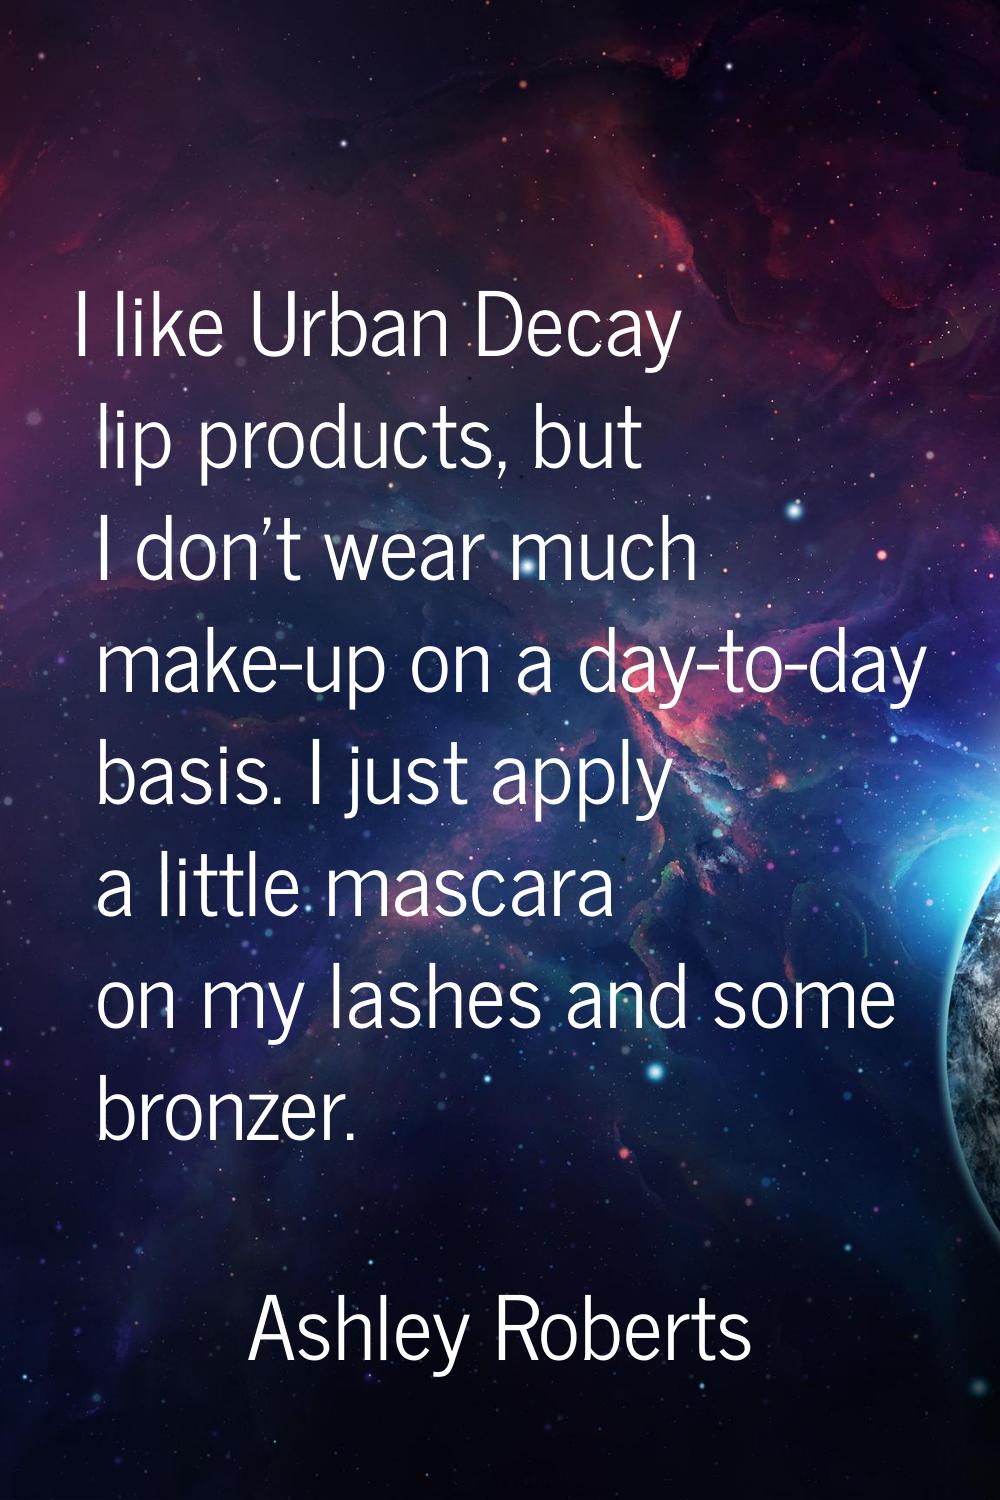 I like Urban Decay lip products, but I don't wear much make-up on a day-to-day basis. I just apply 